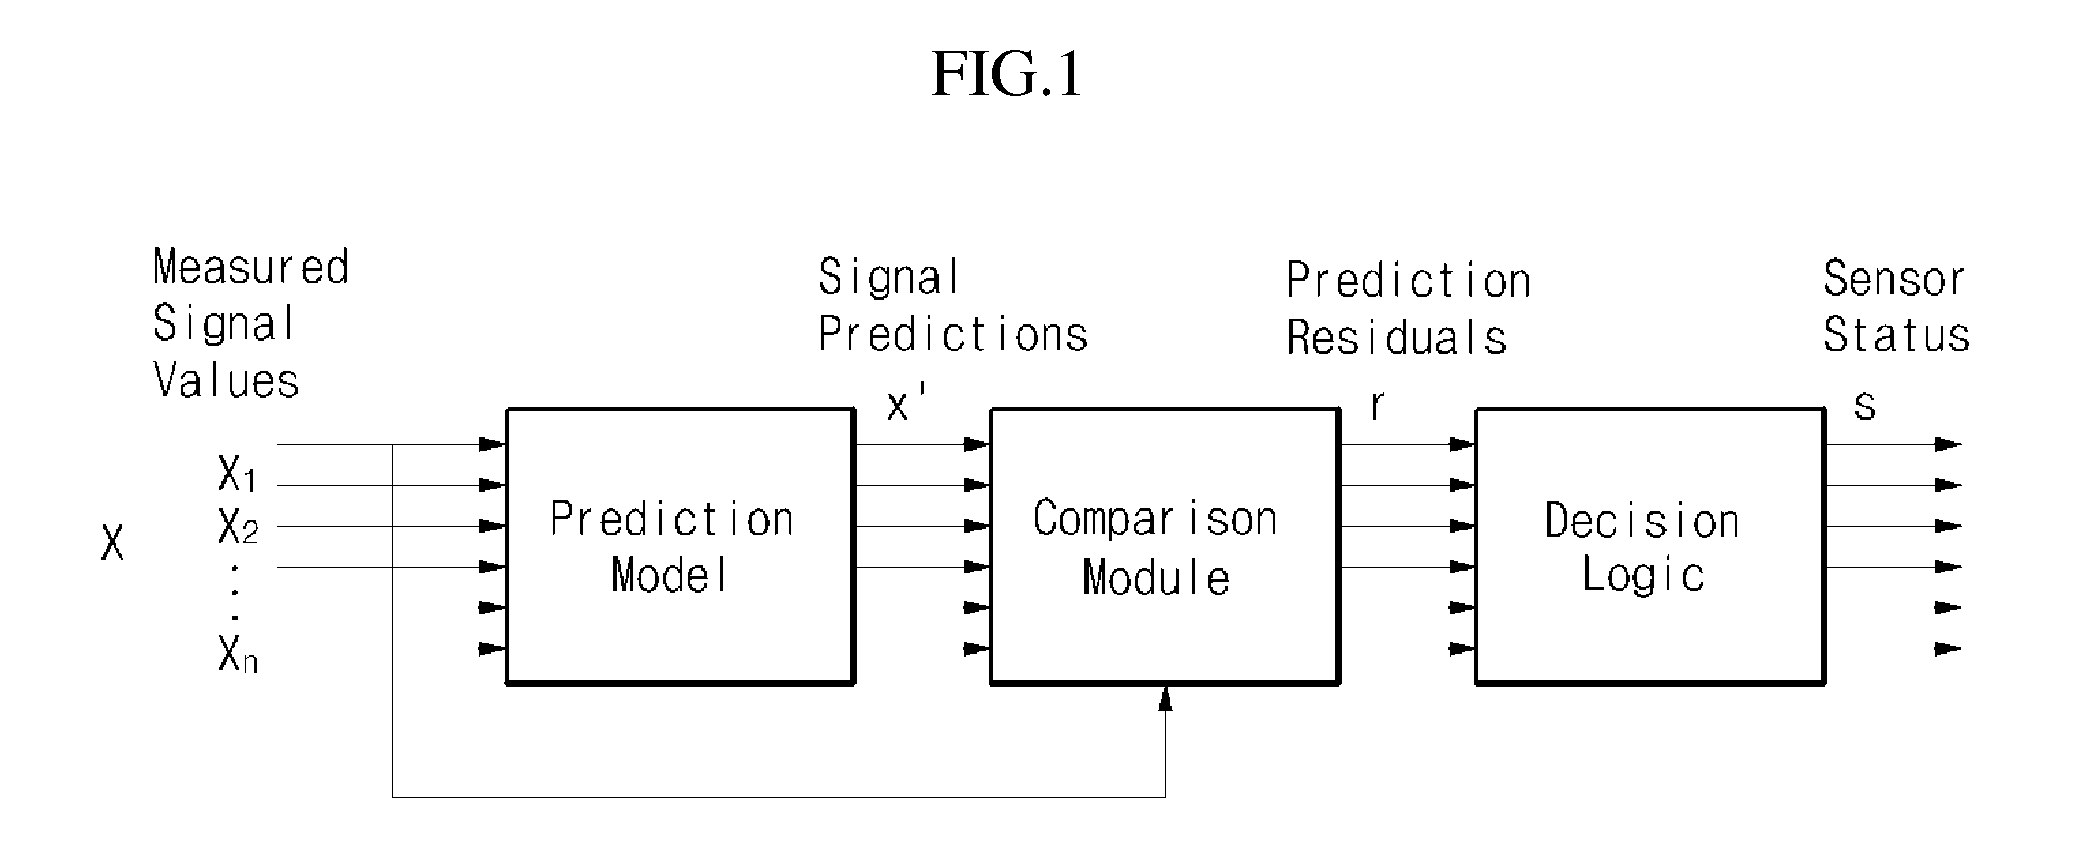 Prediction method for monitoring performance of power plant instruments